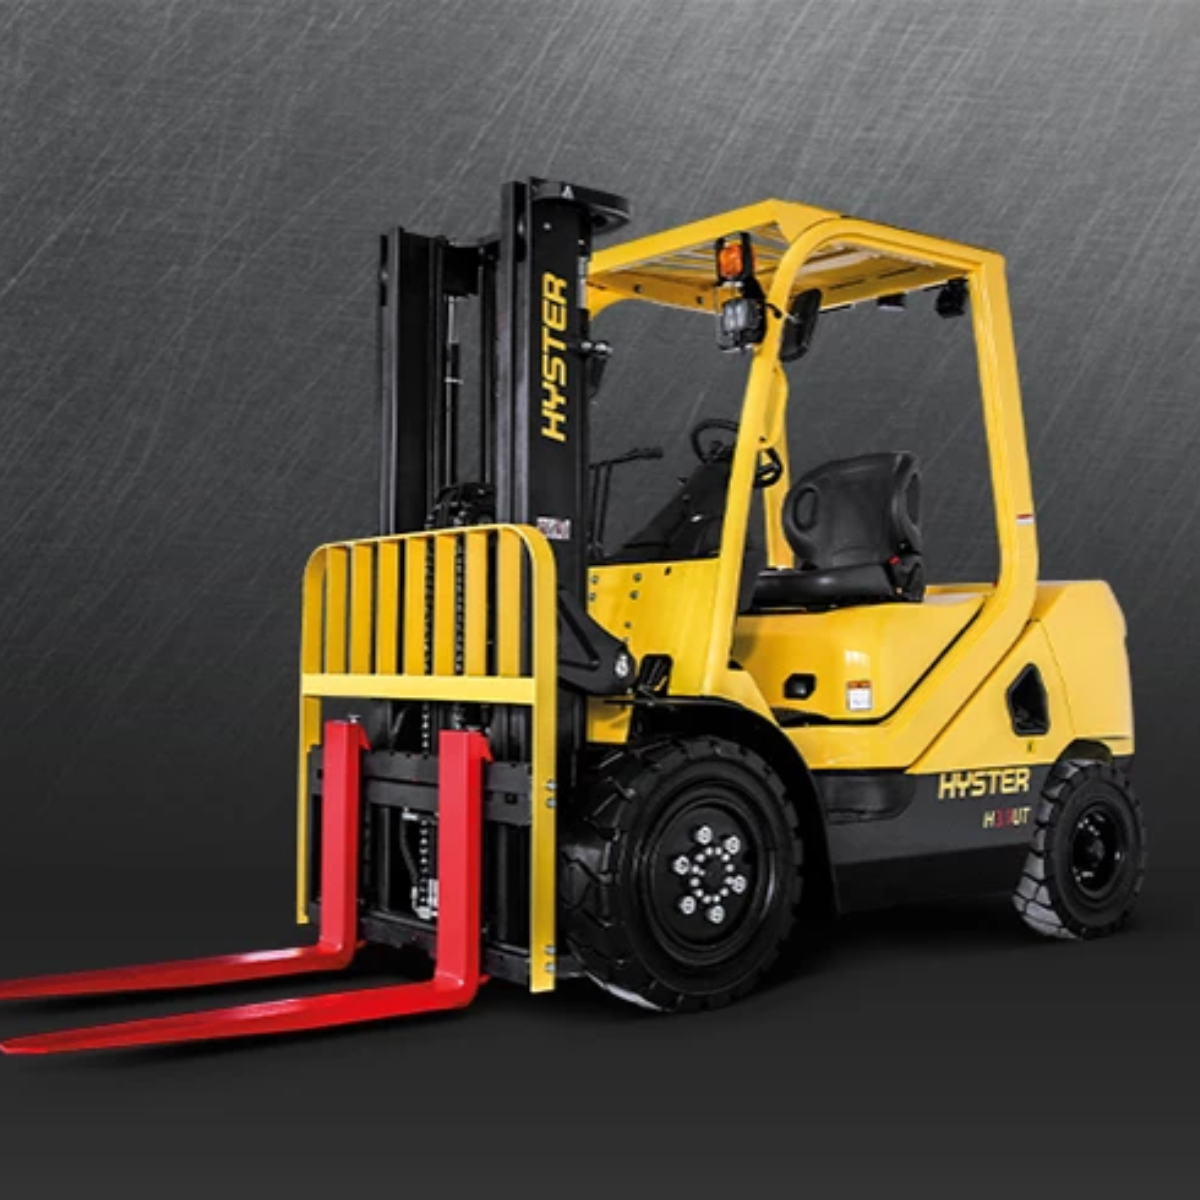 Shop Hyster Equipment & Parts at Lenmark Industries